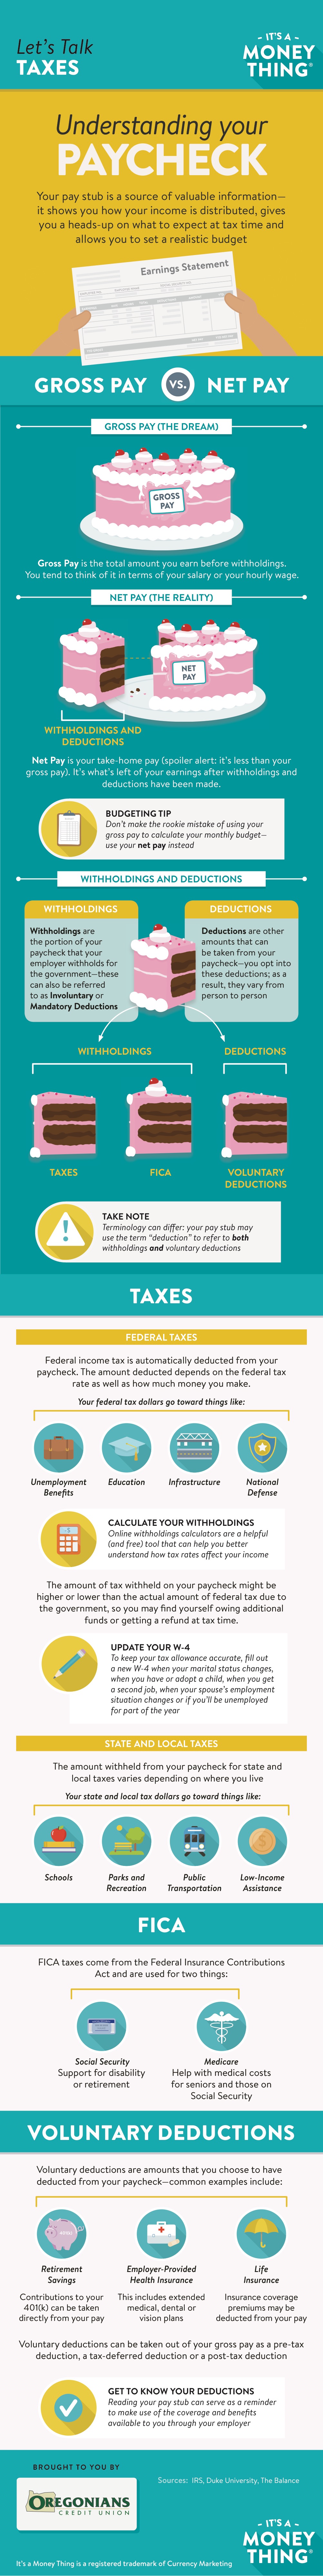 Lets talk taxes infographic